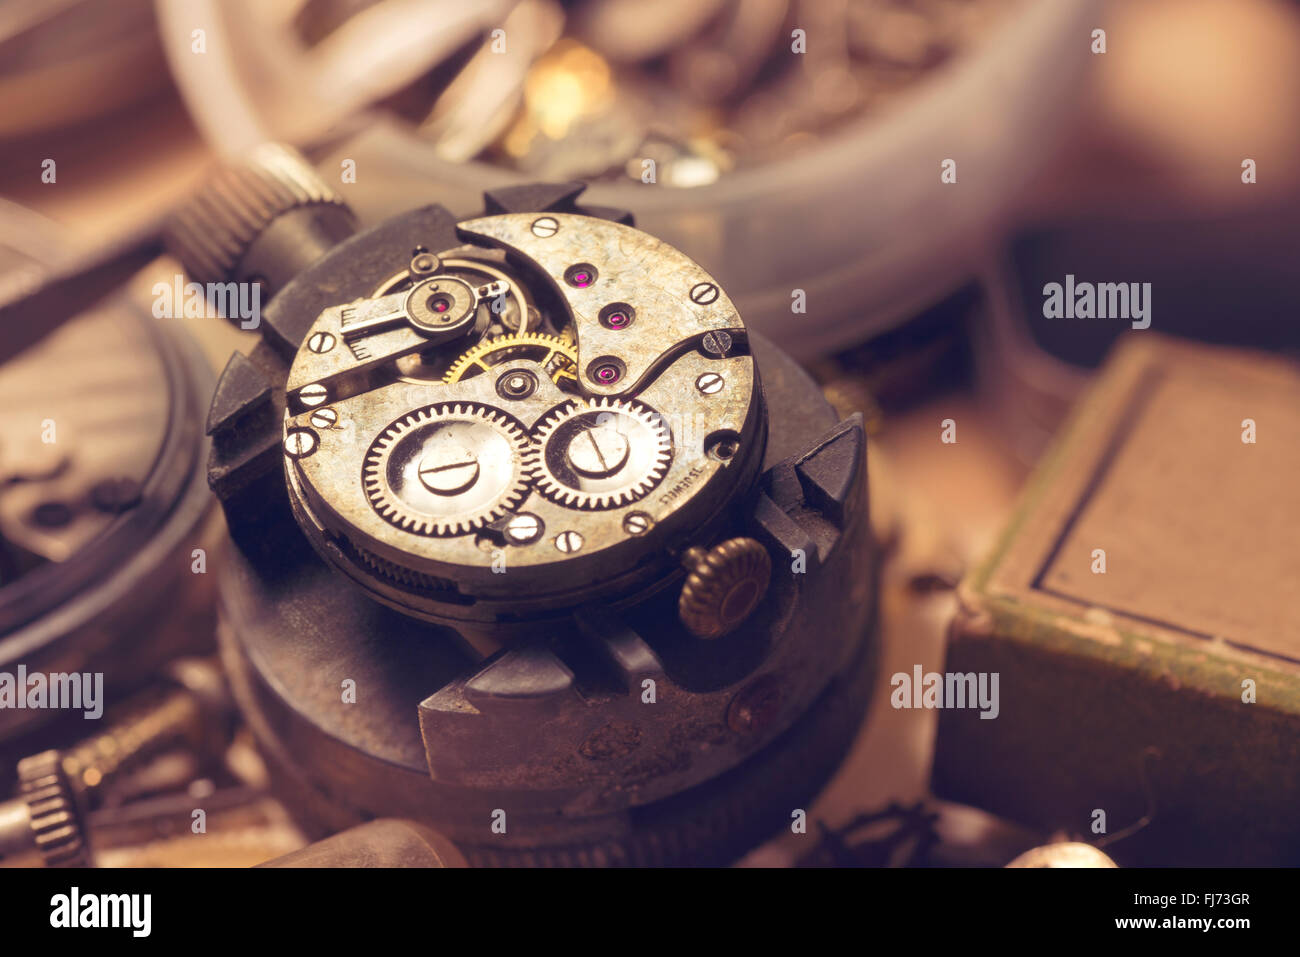 Old Watchmaker Studio. A watch makers work top. The inside workings of a vintage mechanical watch. Stock Photo